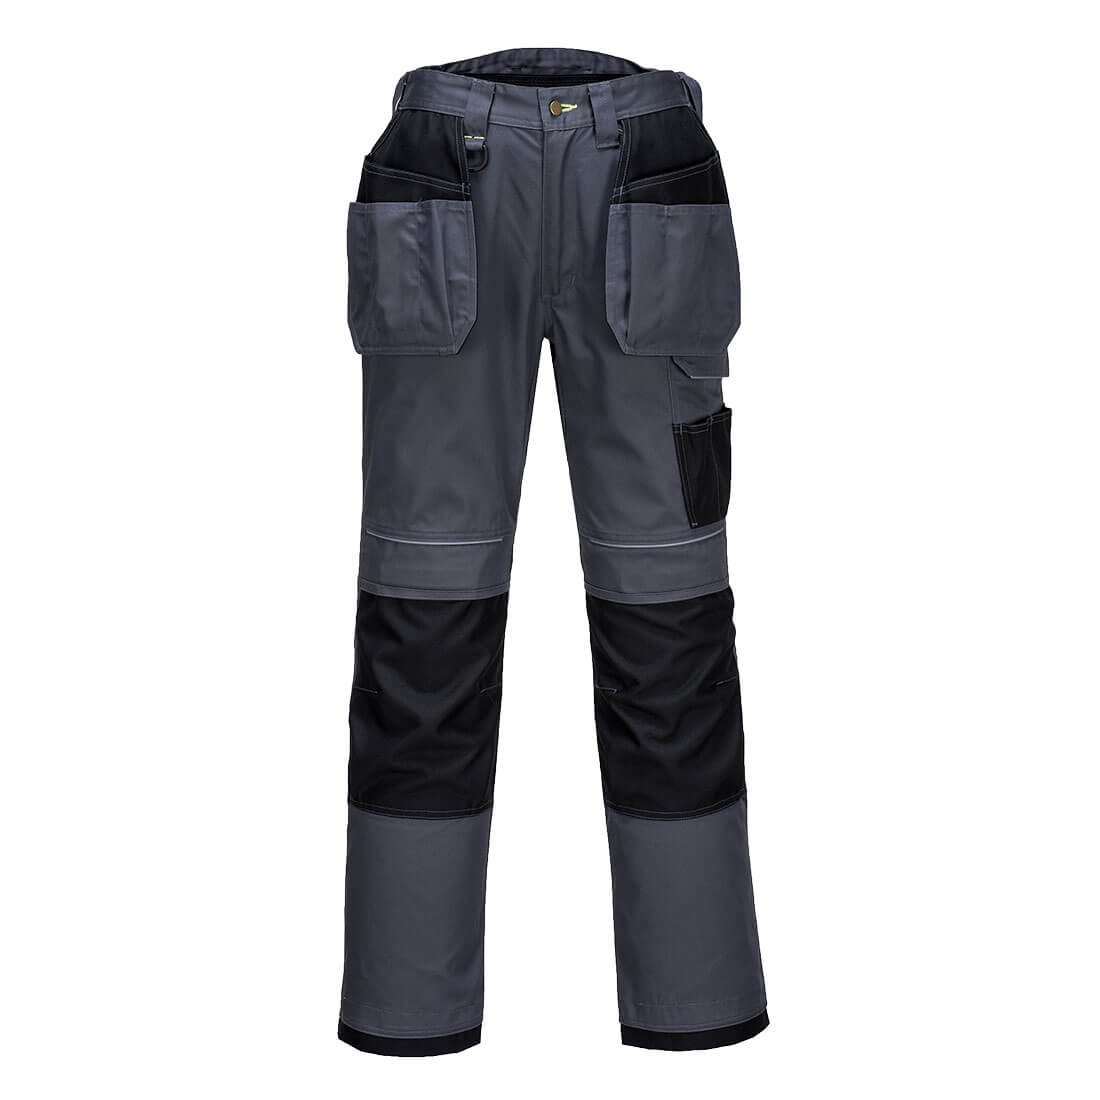 Photo of Pw3 Mens Urban Holster Work Trousers Grey / Black 42